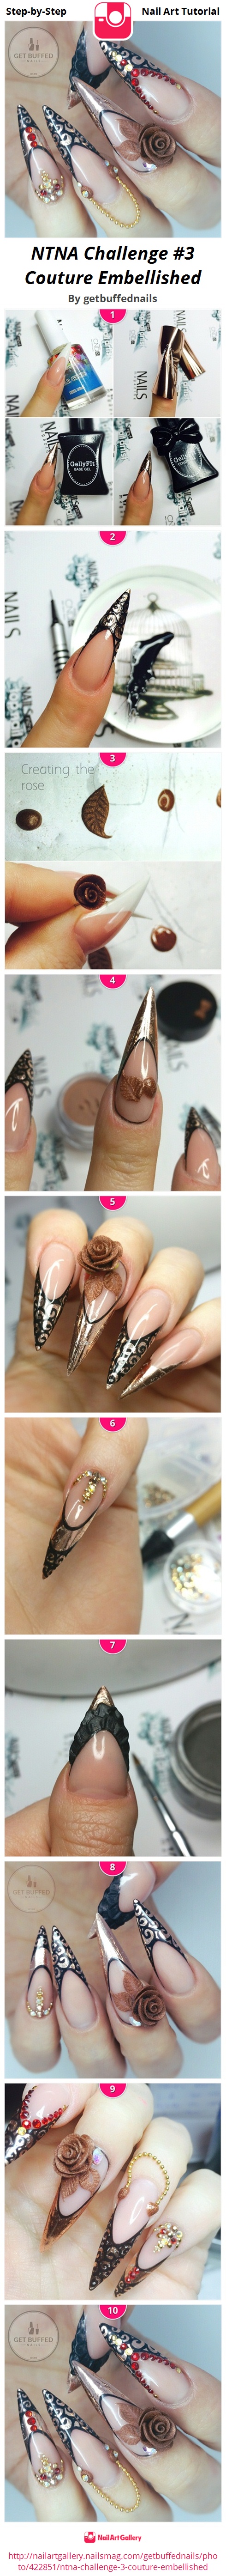 NTNA Challenge #3 Couture Embellished - Nail Art Gallery